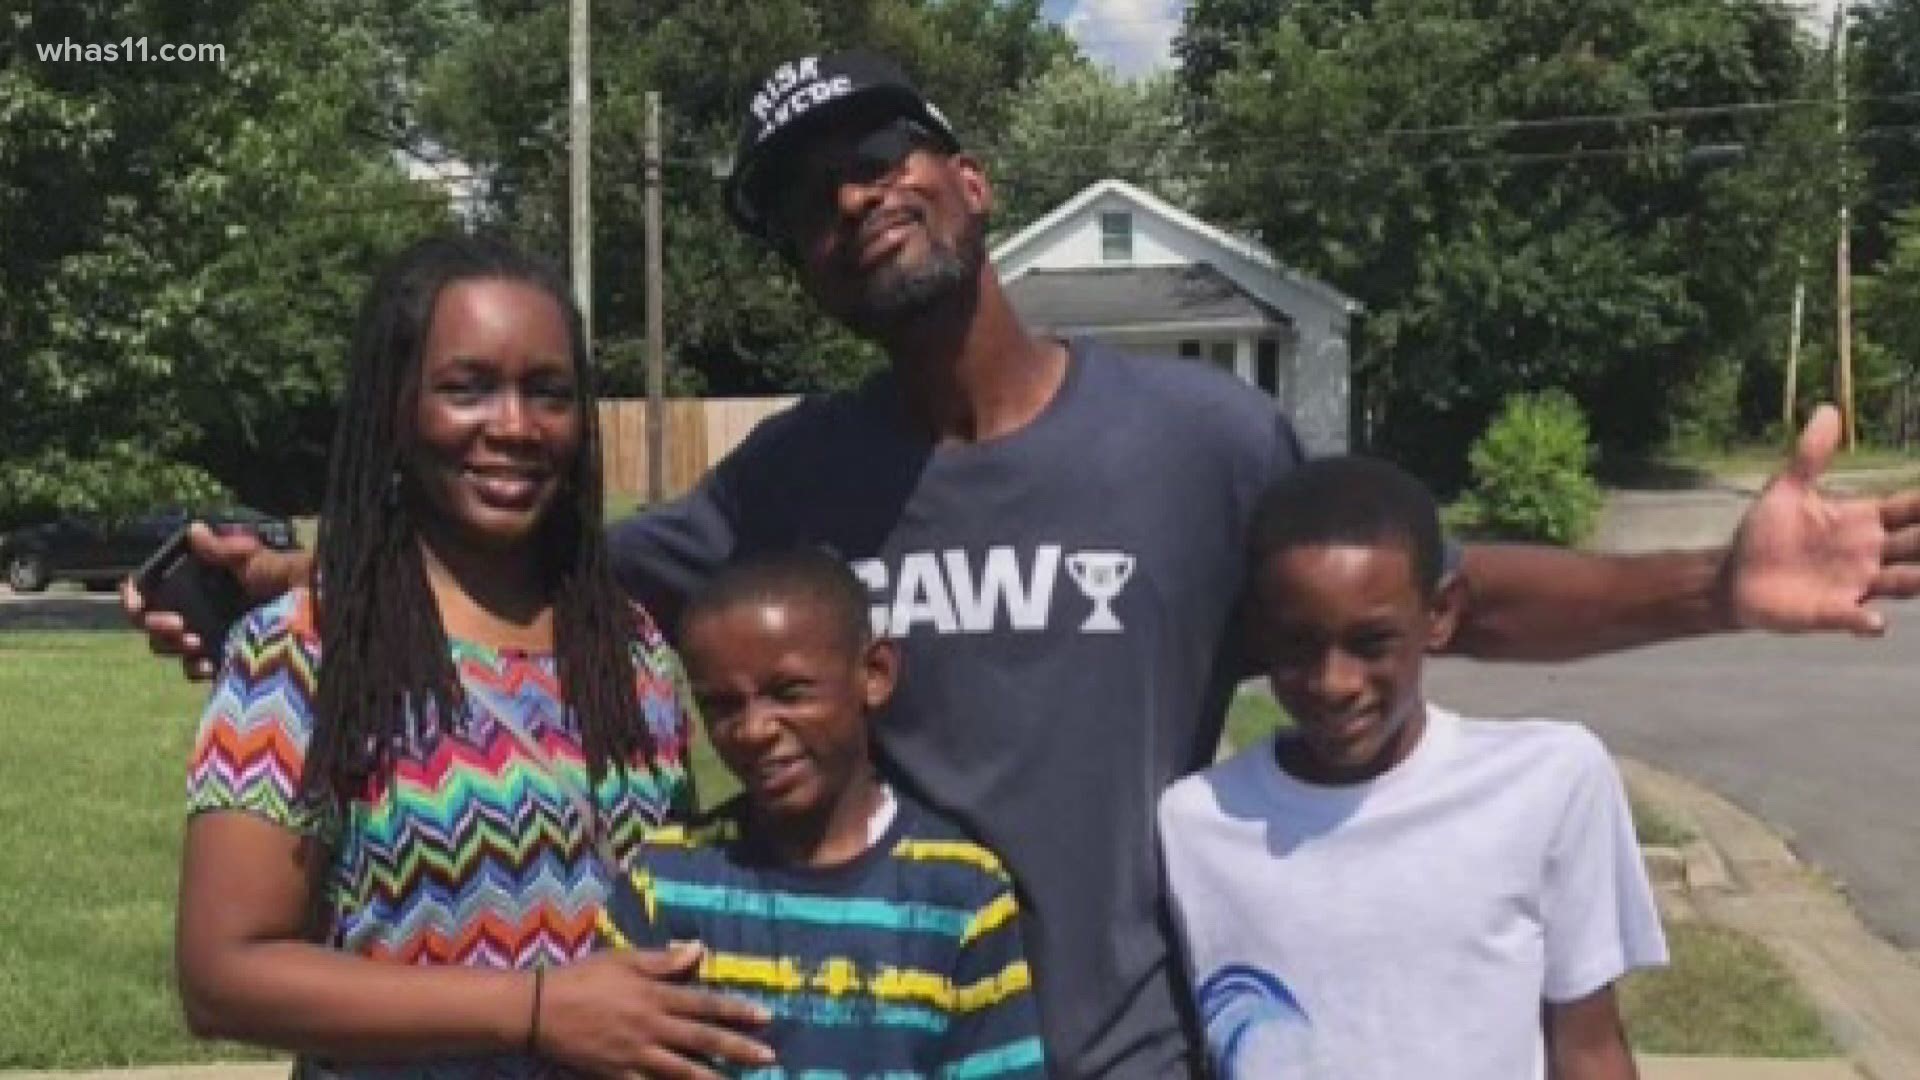 Duan Calloway Sr. was killed Jan. 7. In less than three months, LMPD has already seen 34 homicides.